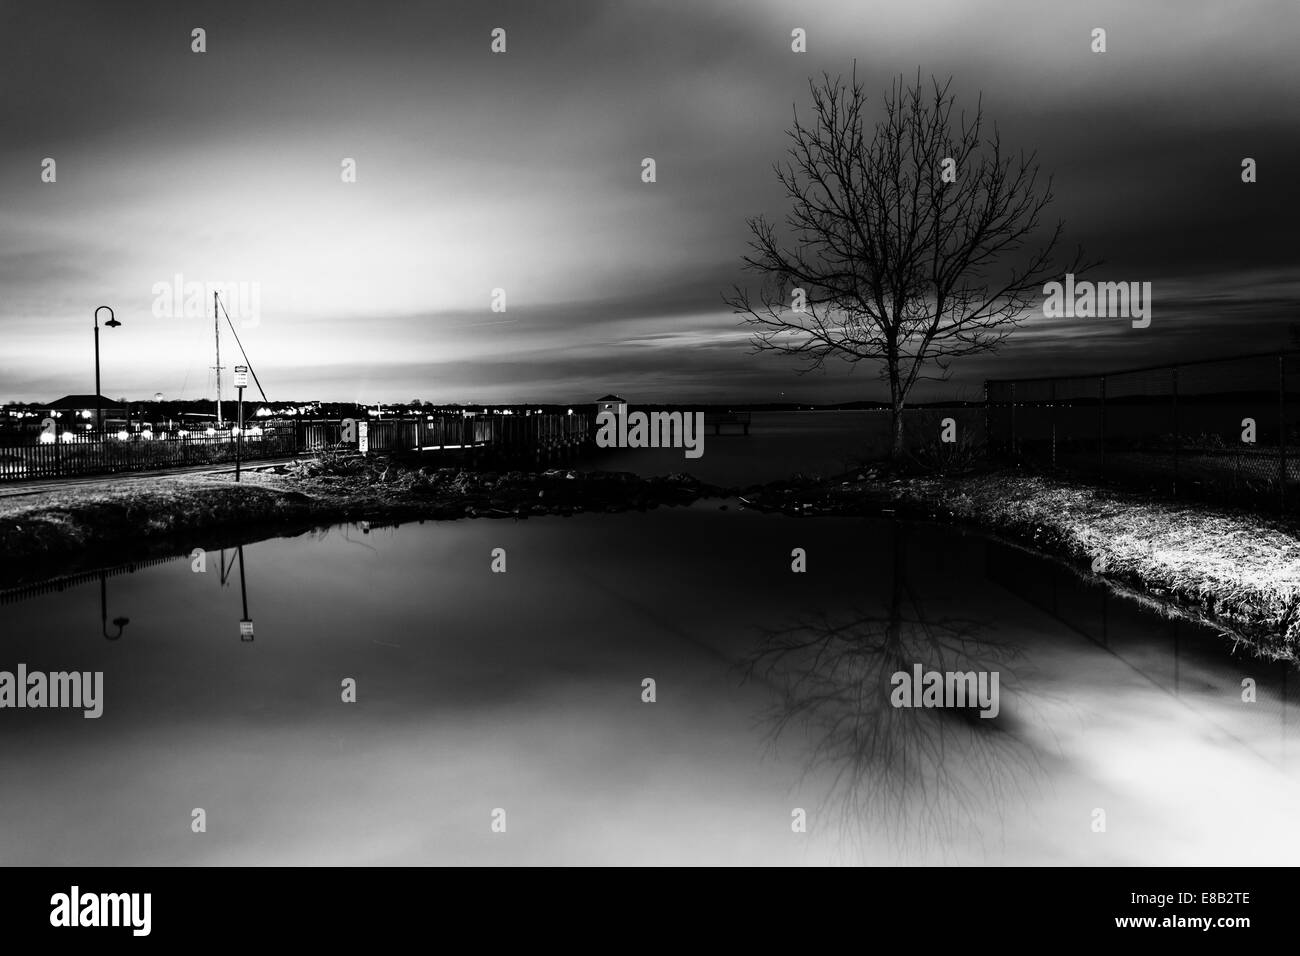 The waterfront at night, in Havre de Grace, Maryland. Stock Photo